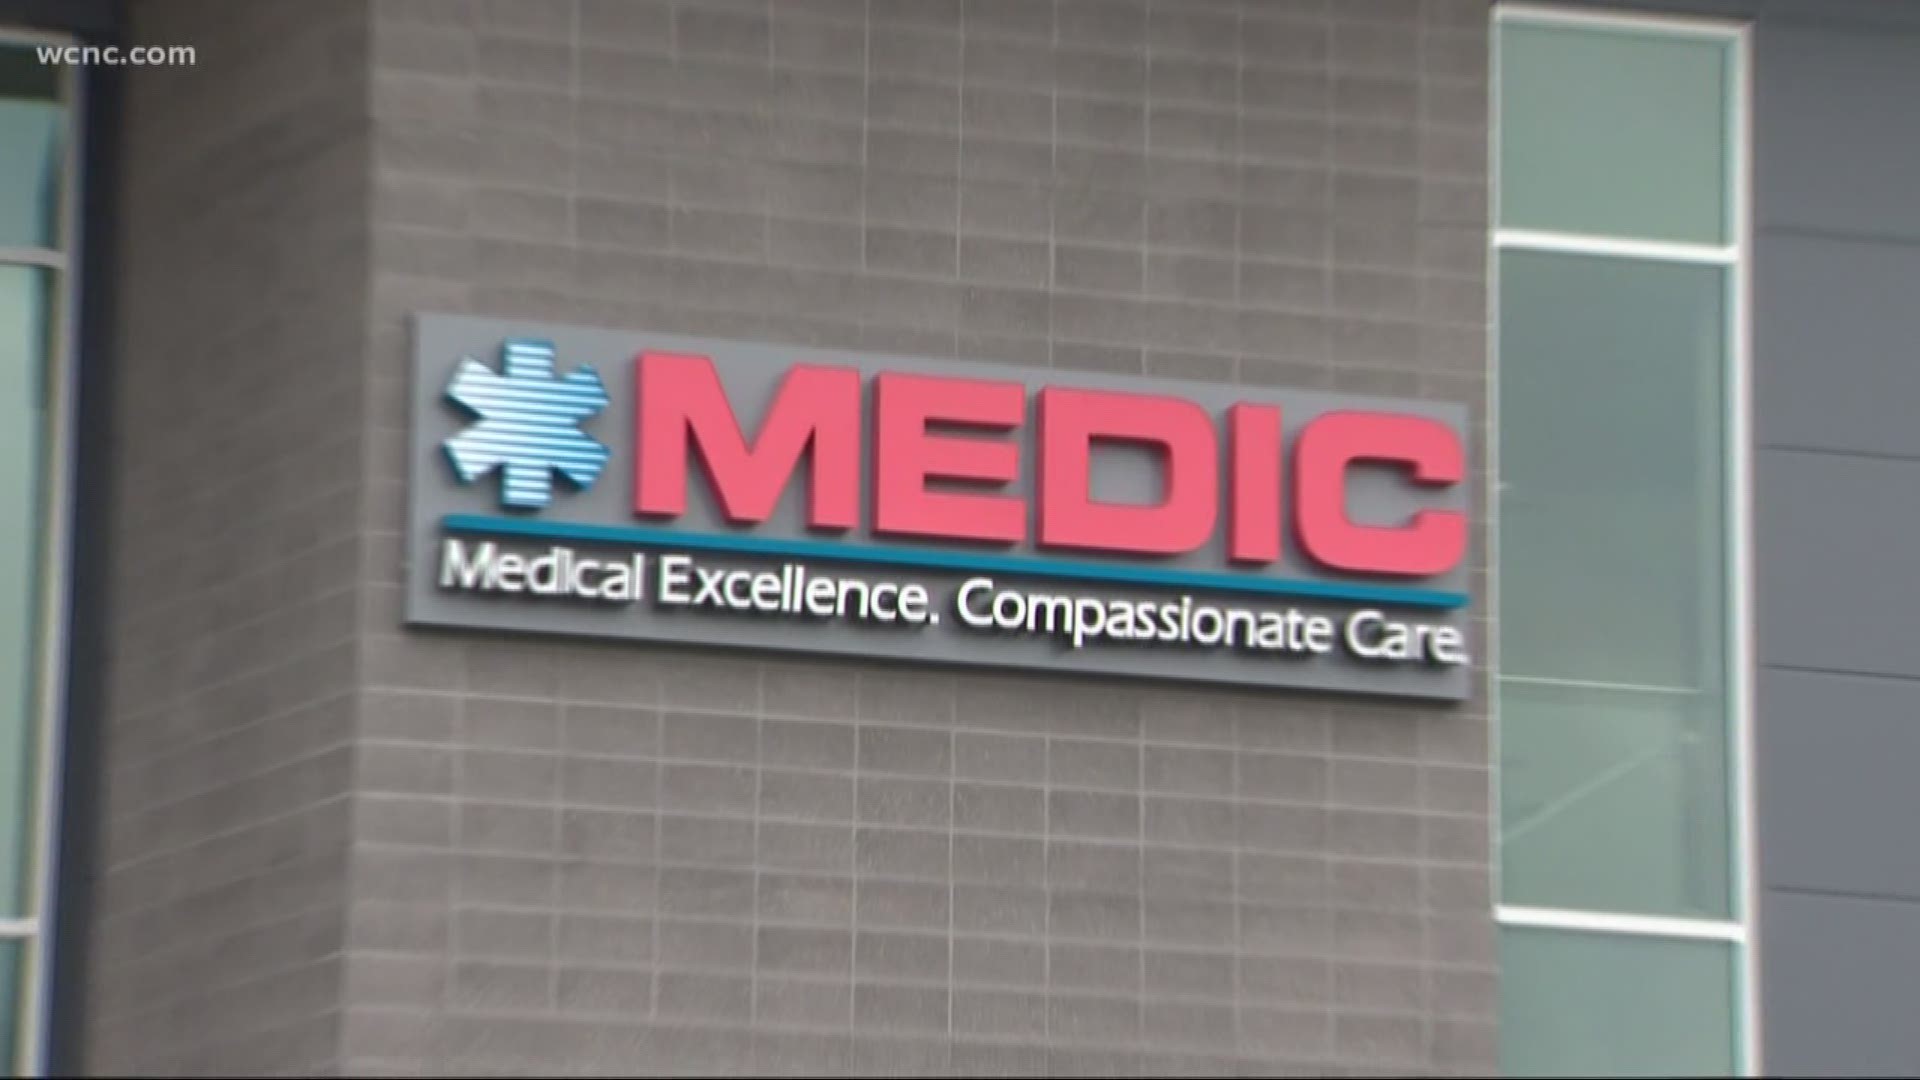 WCNC has learned 26 of 34 ambulances impacted by engine issues have been repaired.